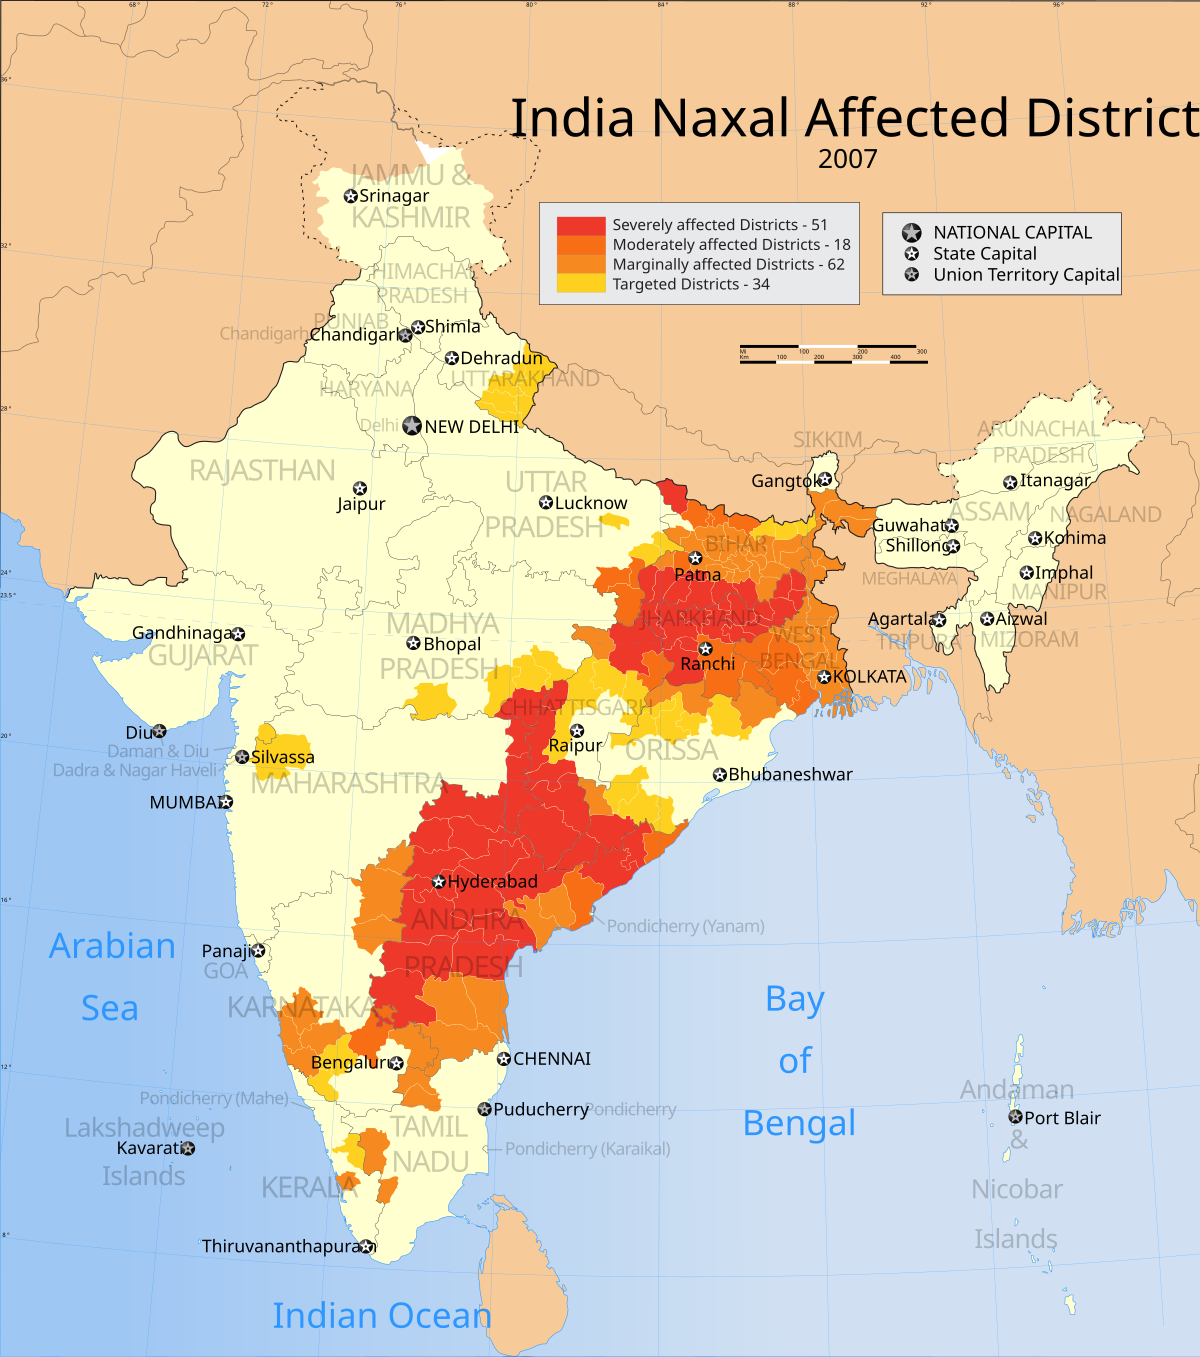 1200px-India_Naxal_affected_districts_map.svg.png